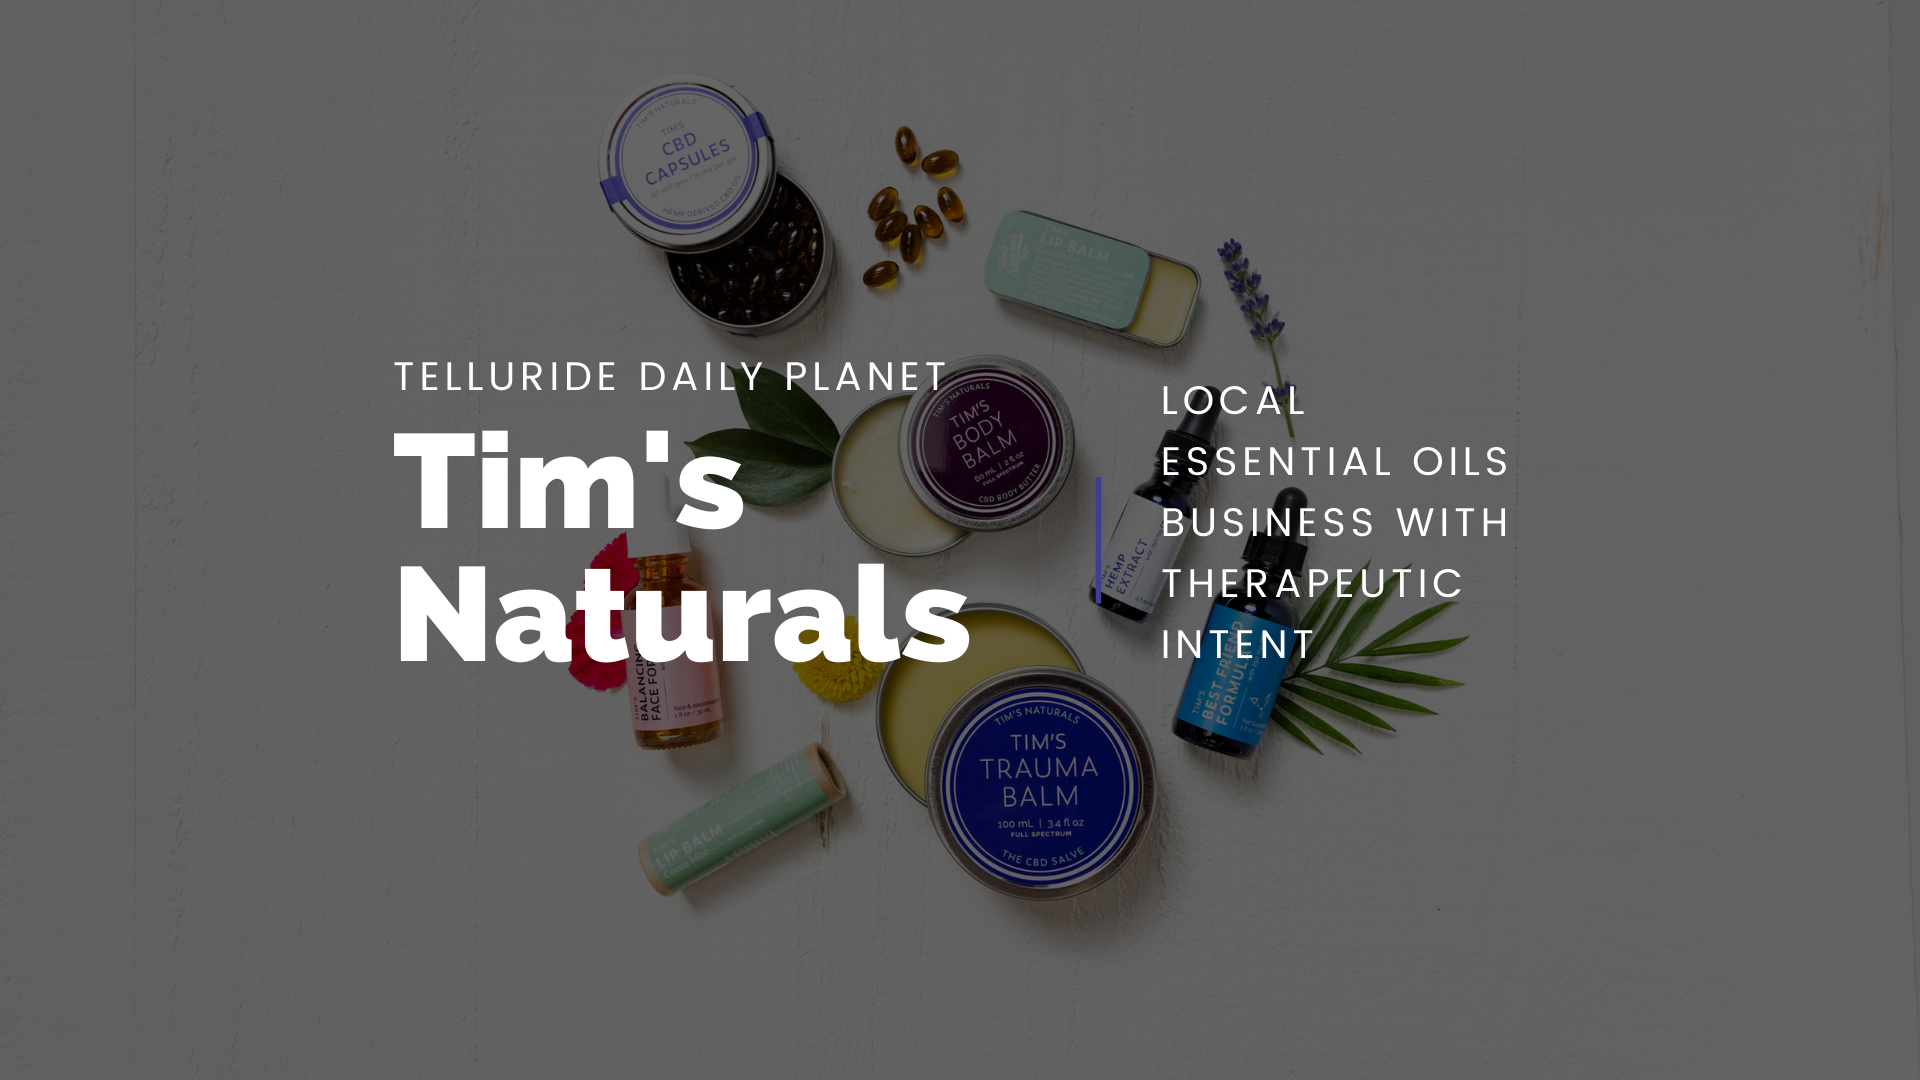 Telluride Daily Planet: Tim’s Naturals